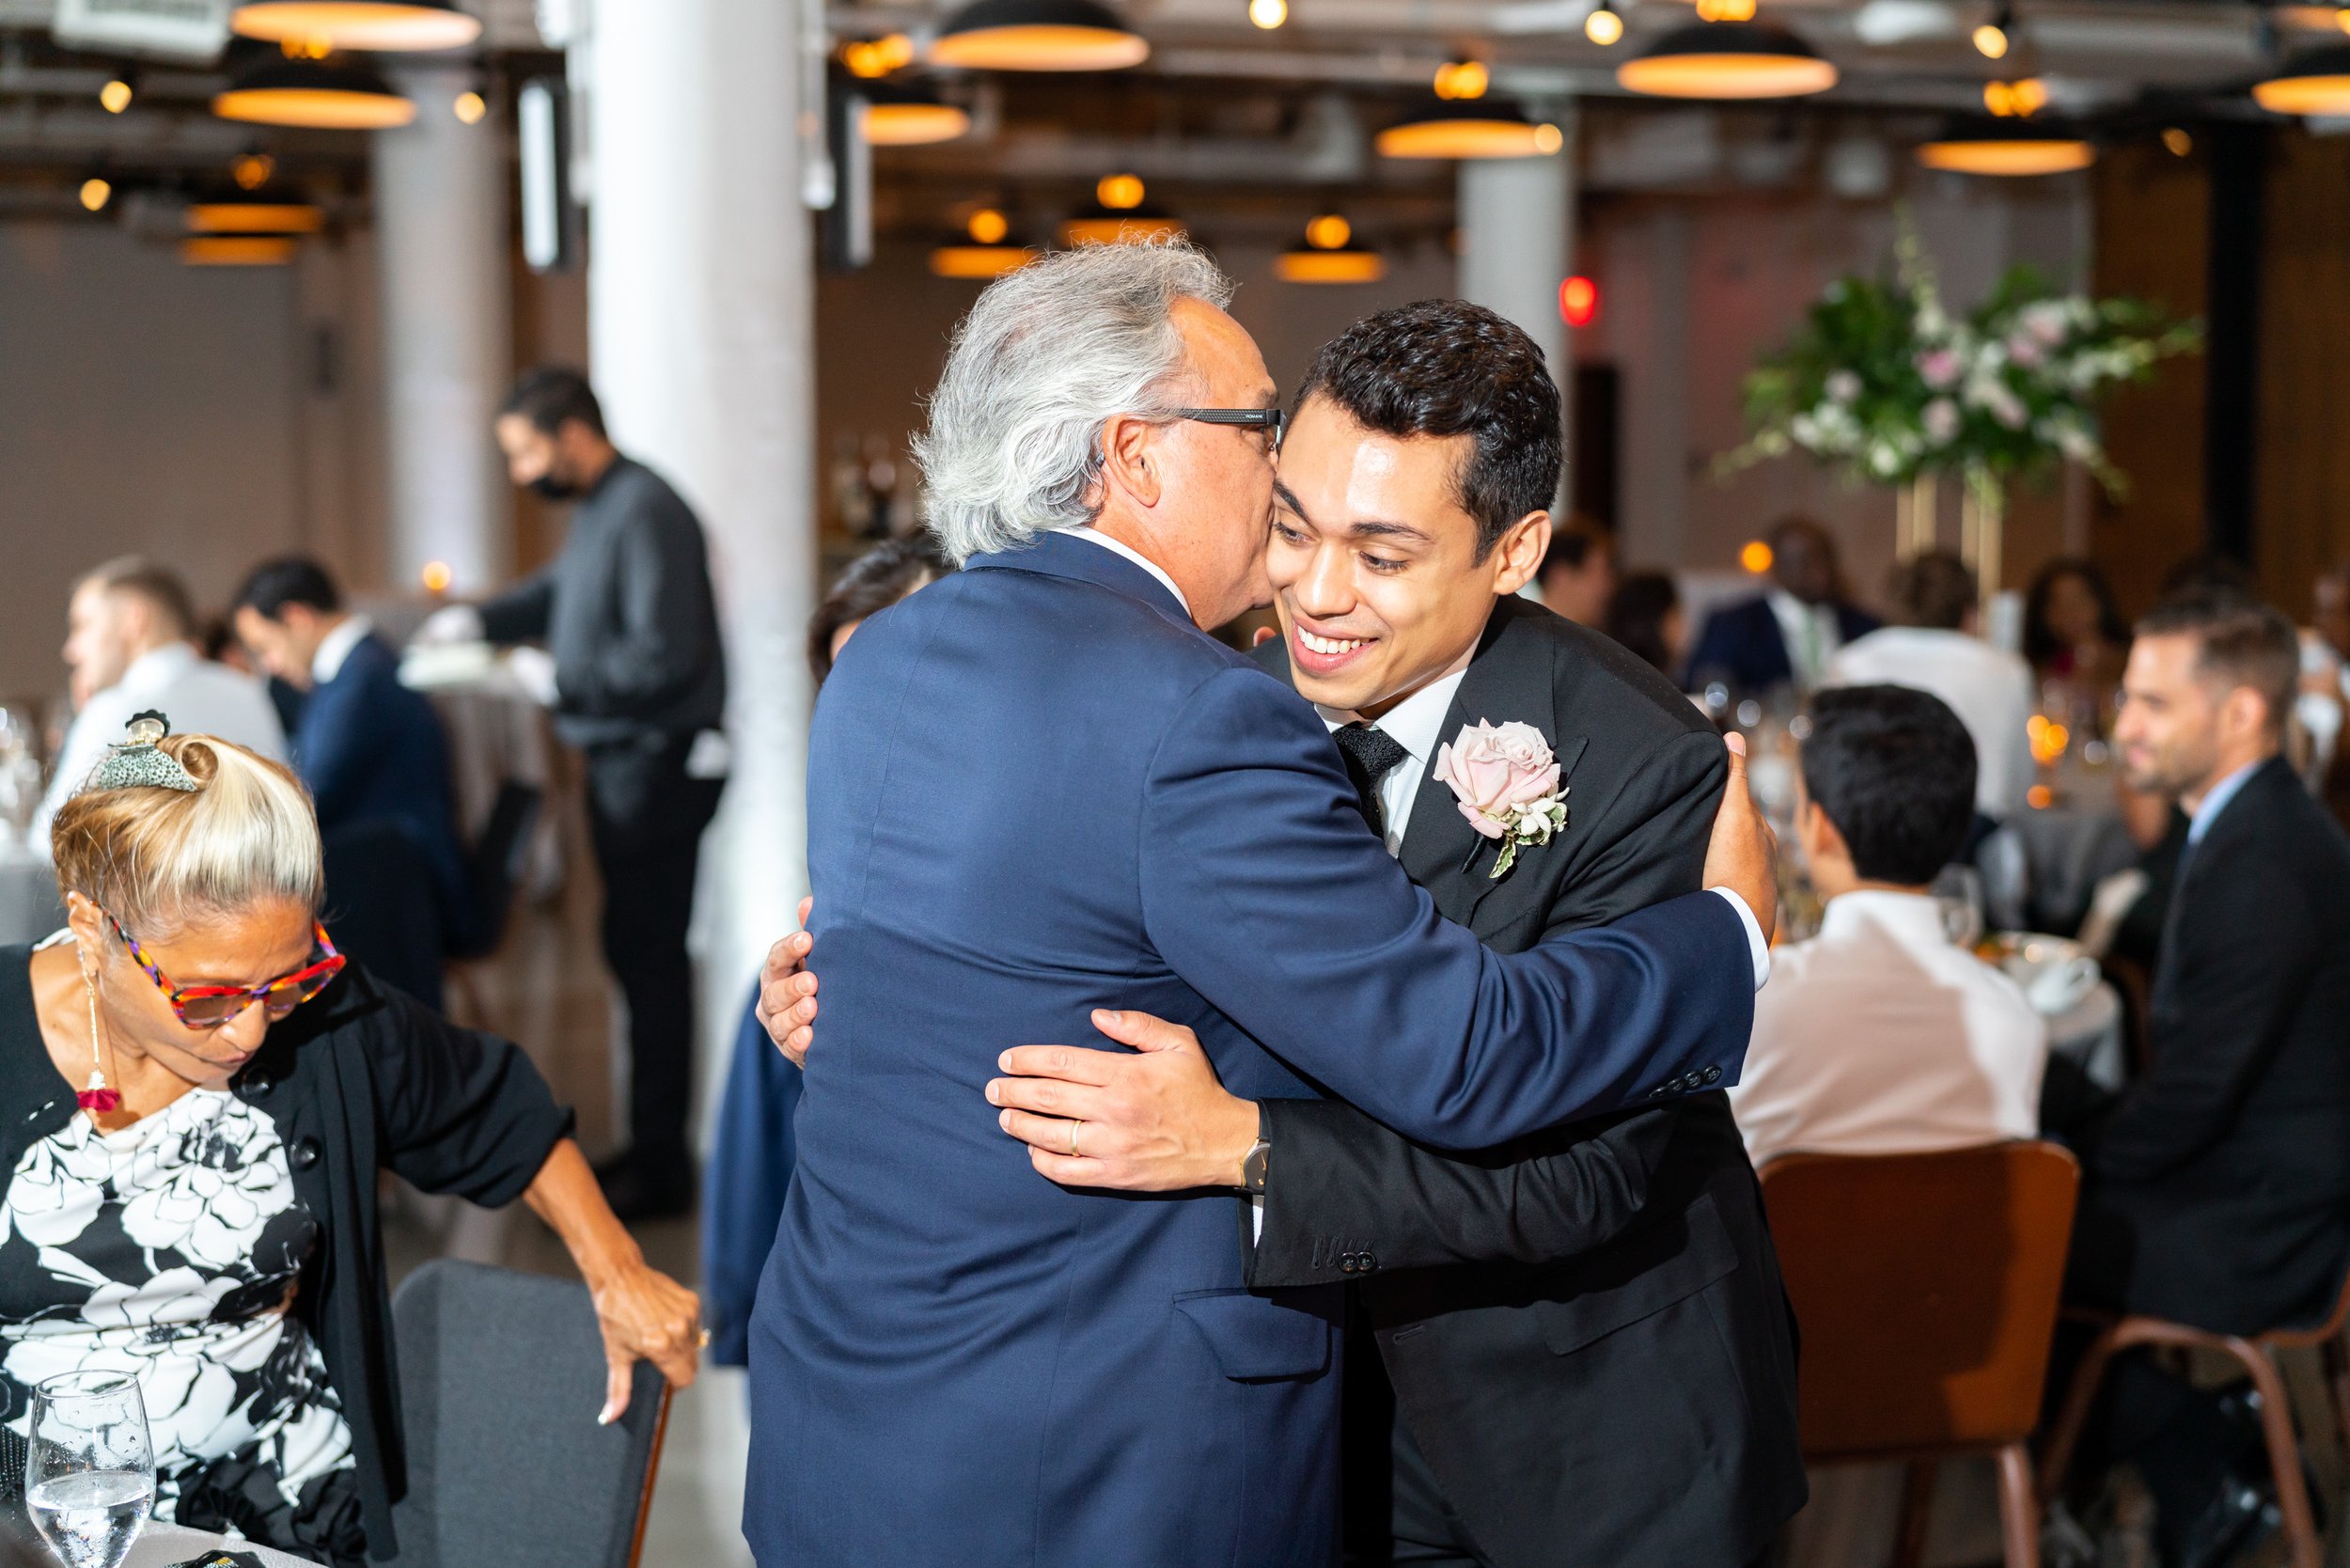 Groom hugs guest at fun wedding reception at the Eaton hotel